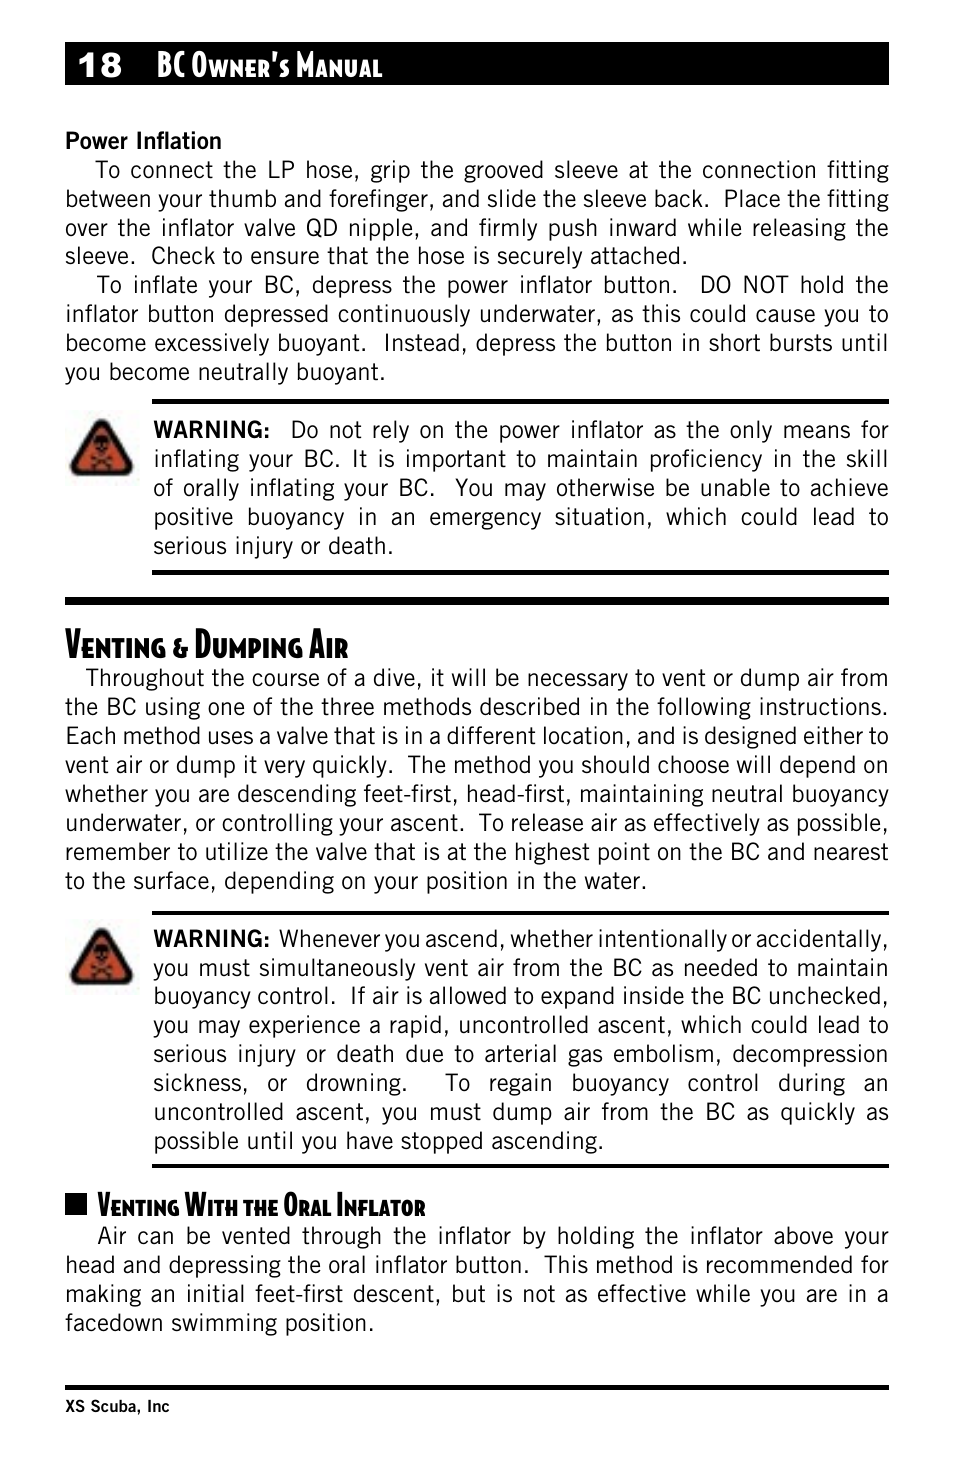 Power inflation, Venting & dumping air, Venting with the oral inflator | 18 bc owner’s manual, Venting with the oral inﬂator | XS Scuba Buoyancy Compensator User Manual | Page 18 / 24